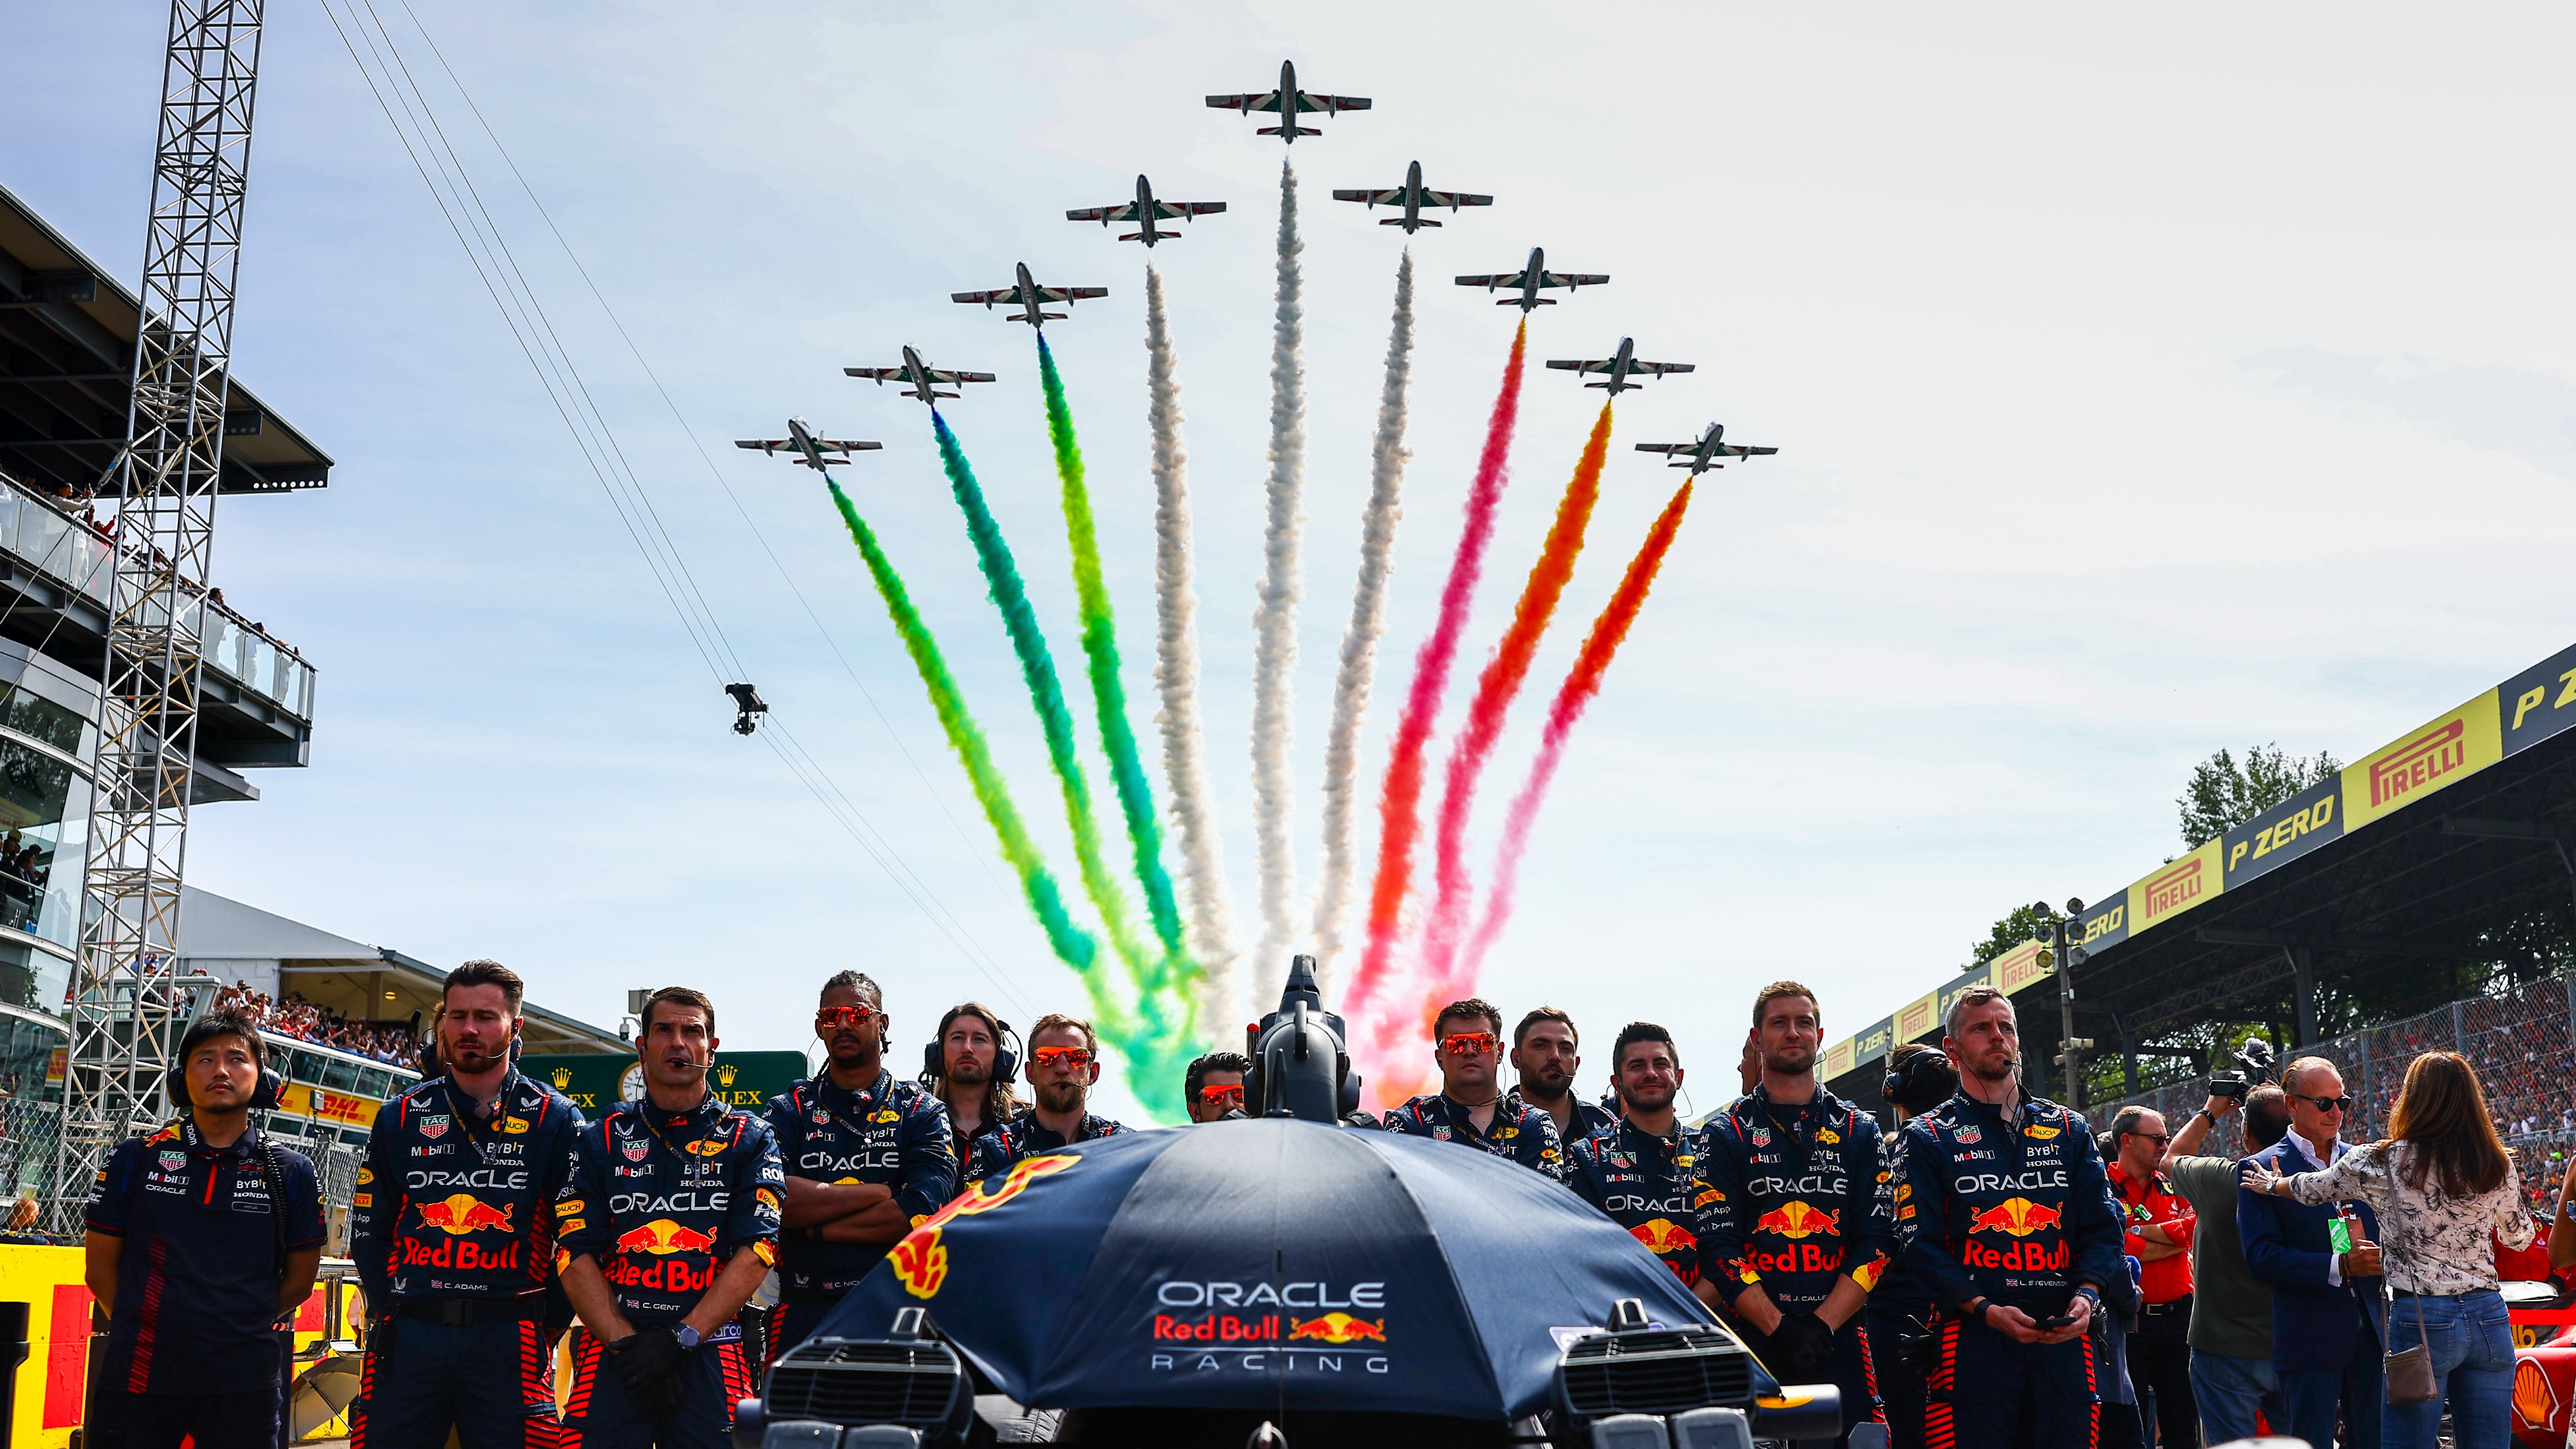 Horner: This victory is down to everybody in the Red Bull team